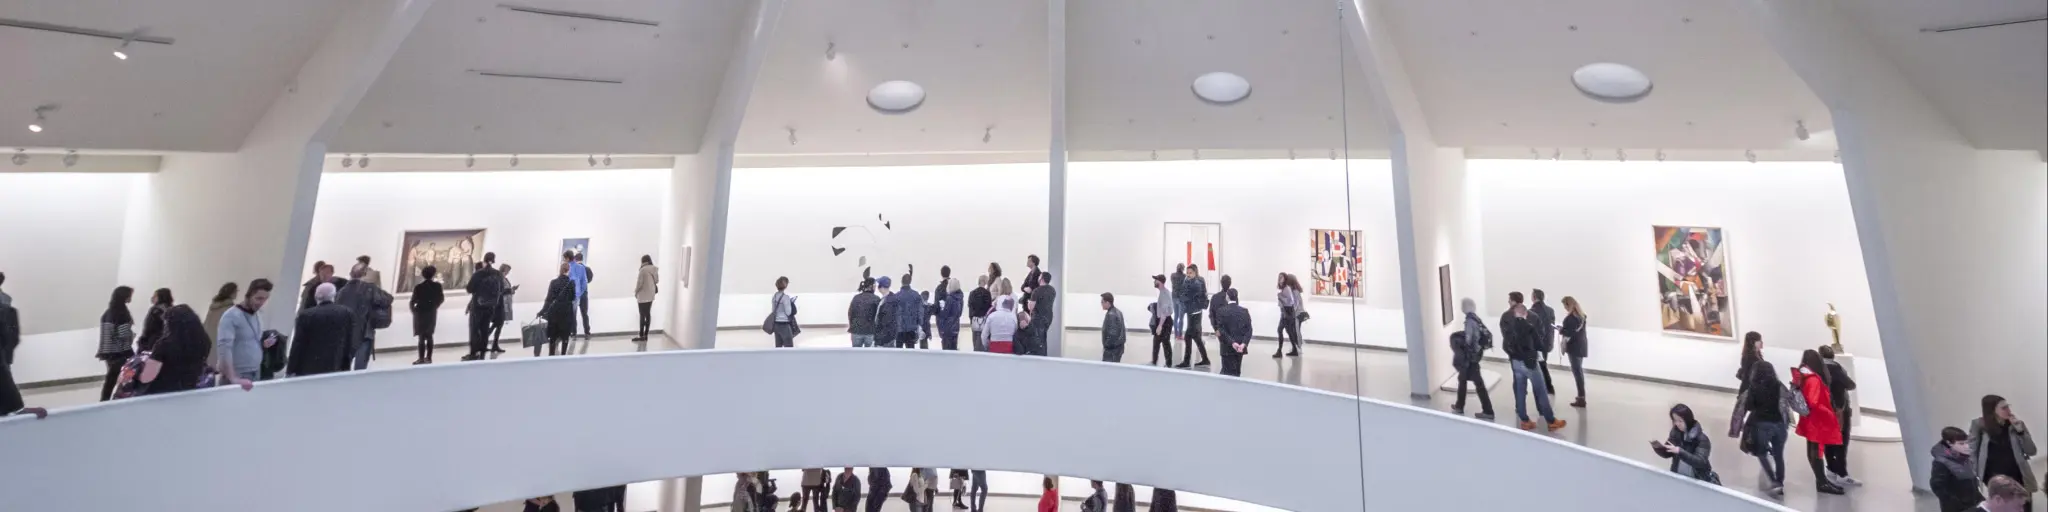 Busy interior of The Guggenheim Museum, with people walking between the gallery levels